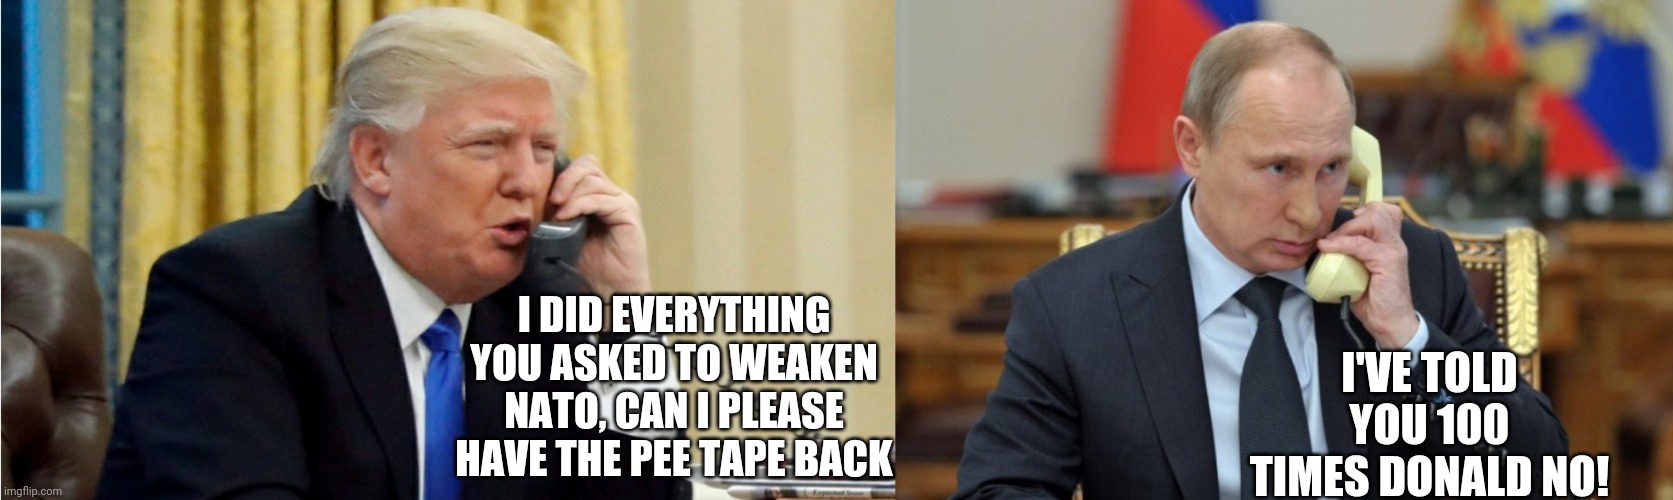 I'VE TOLD YOU 100 TIMES DONALD NO! I DID EVERYTHING YOU ASKED TO WEAKEN NATO, CAN I PLEASE HAVE THE PEE TAPE BACK | image tagged in putin phone,trump on phone | made w/ Imgflip meme maker